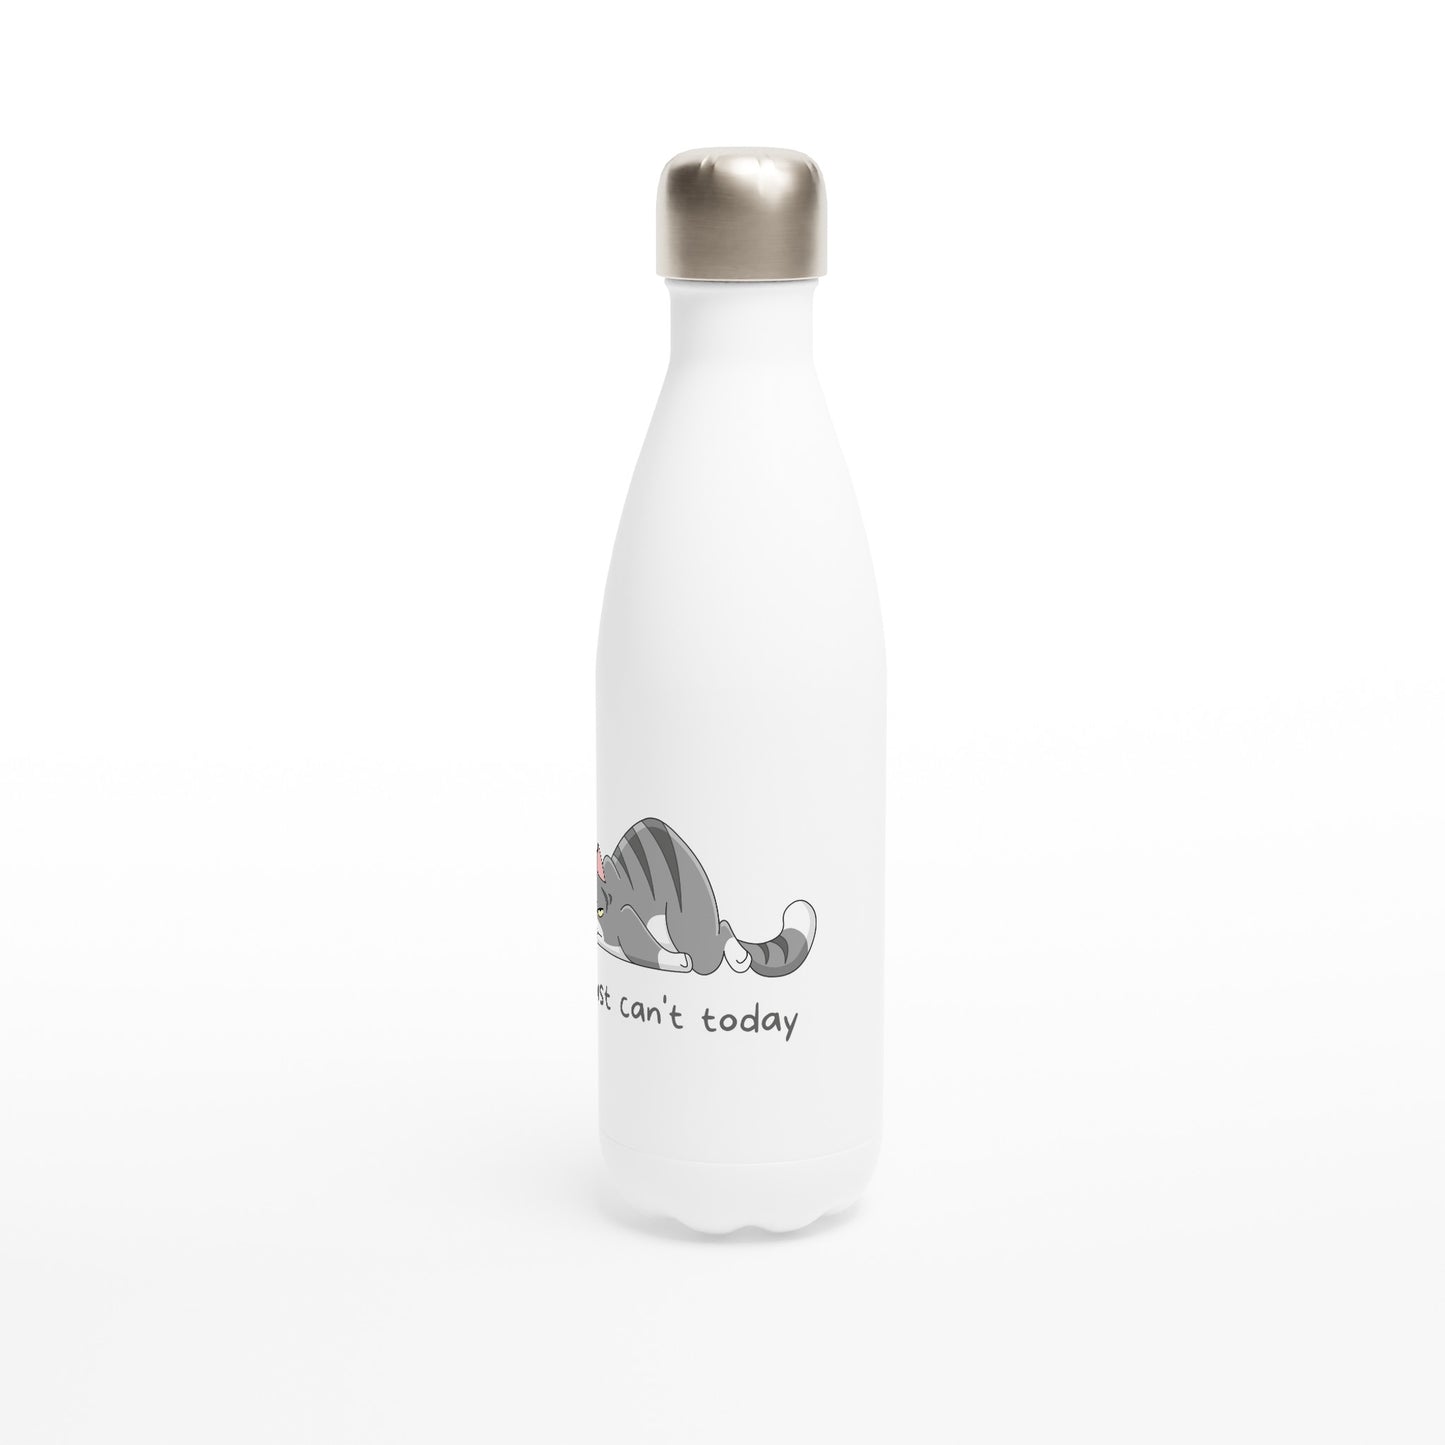 Cat, I Just Can't Today - White 17oz Stainless Steel Water Bottle White Water Bottle animal